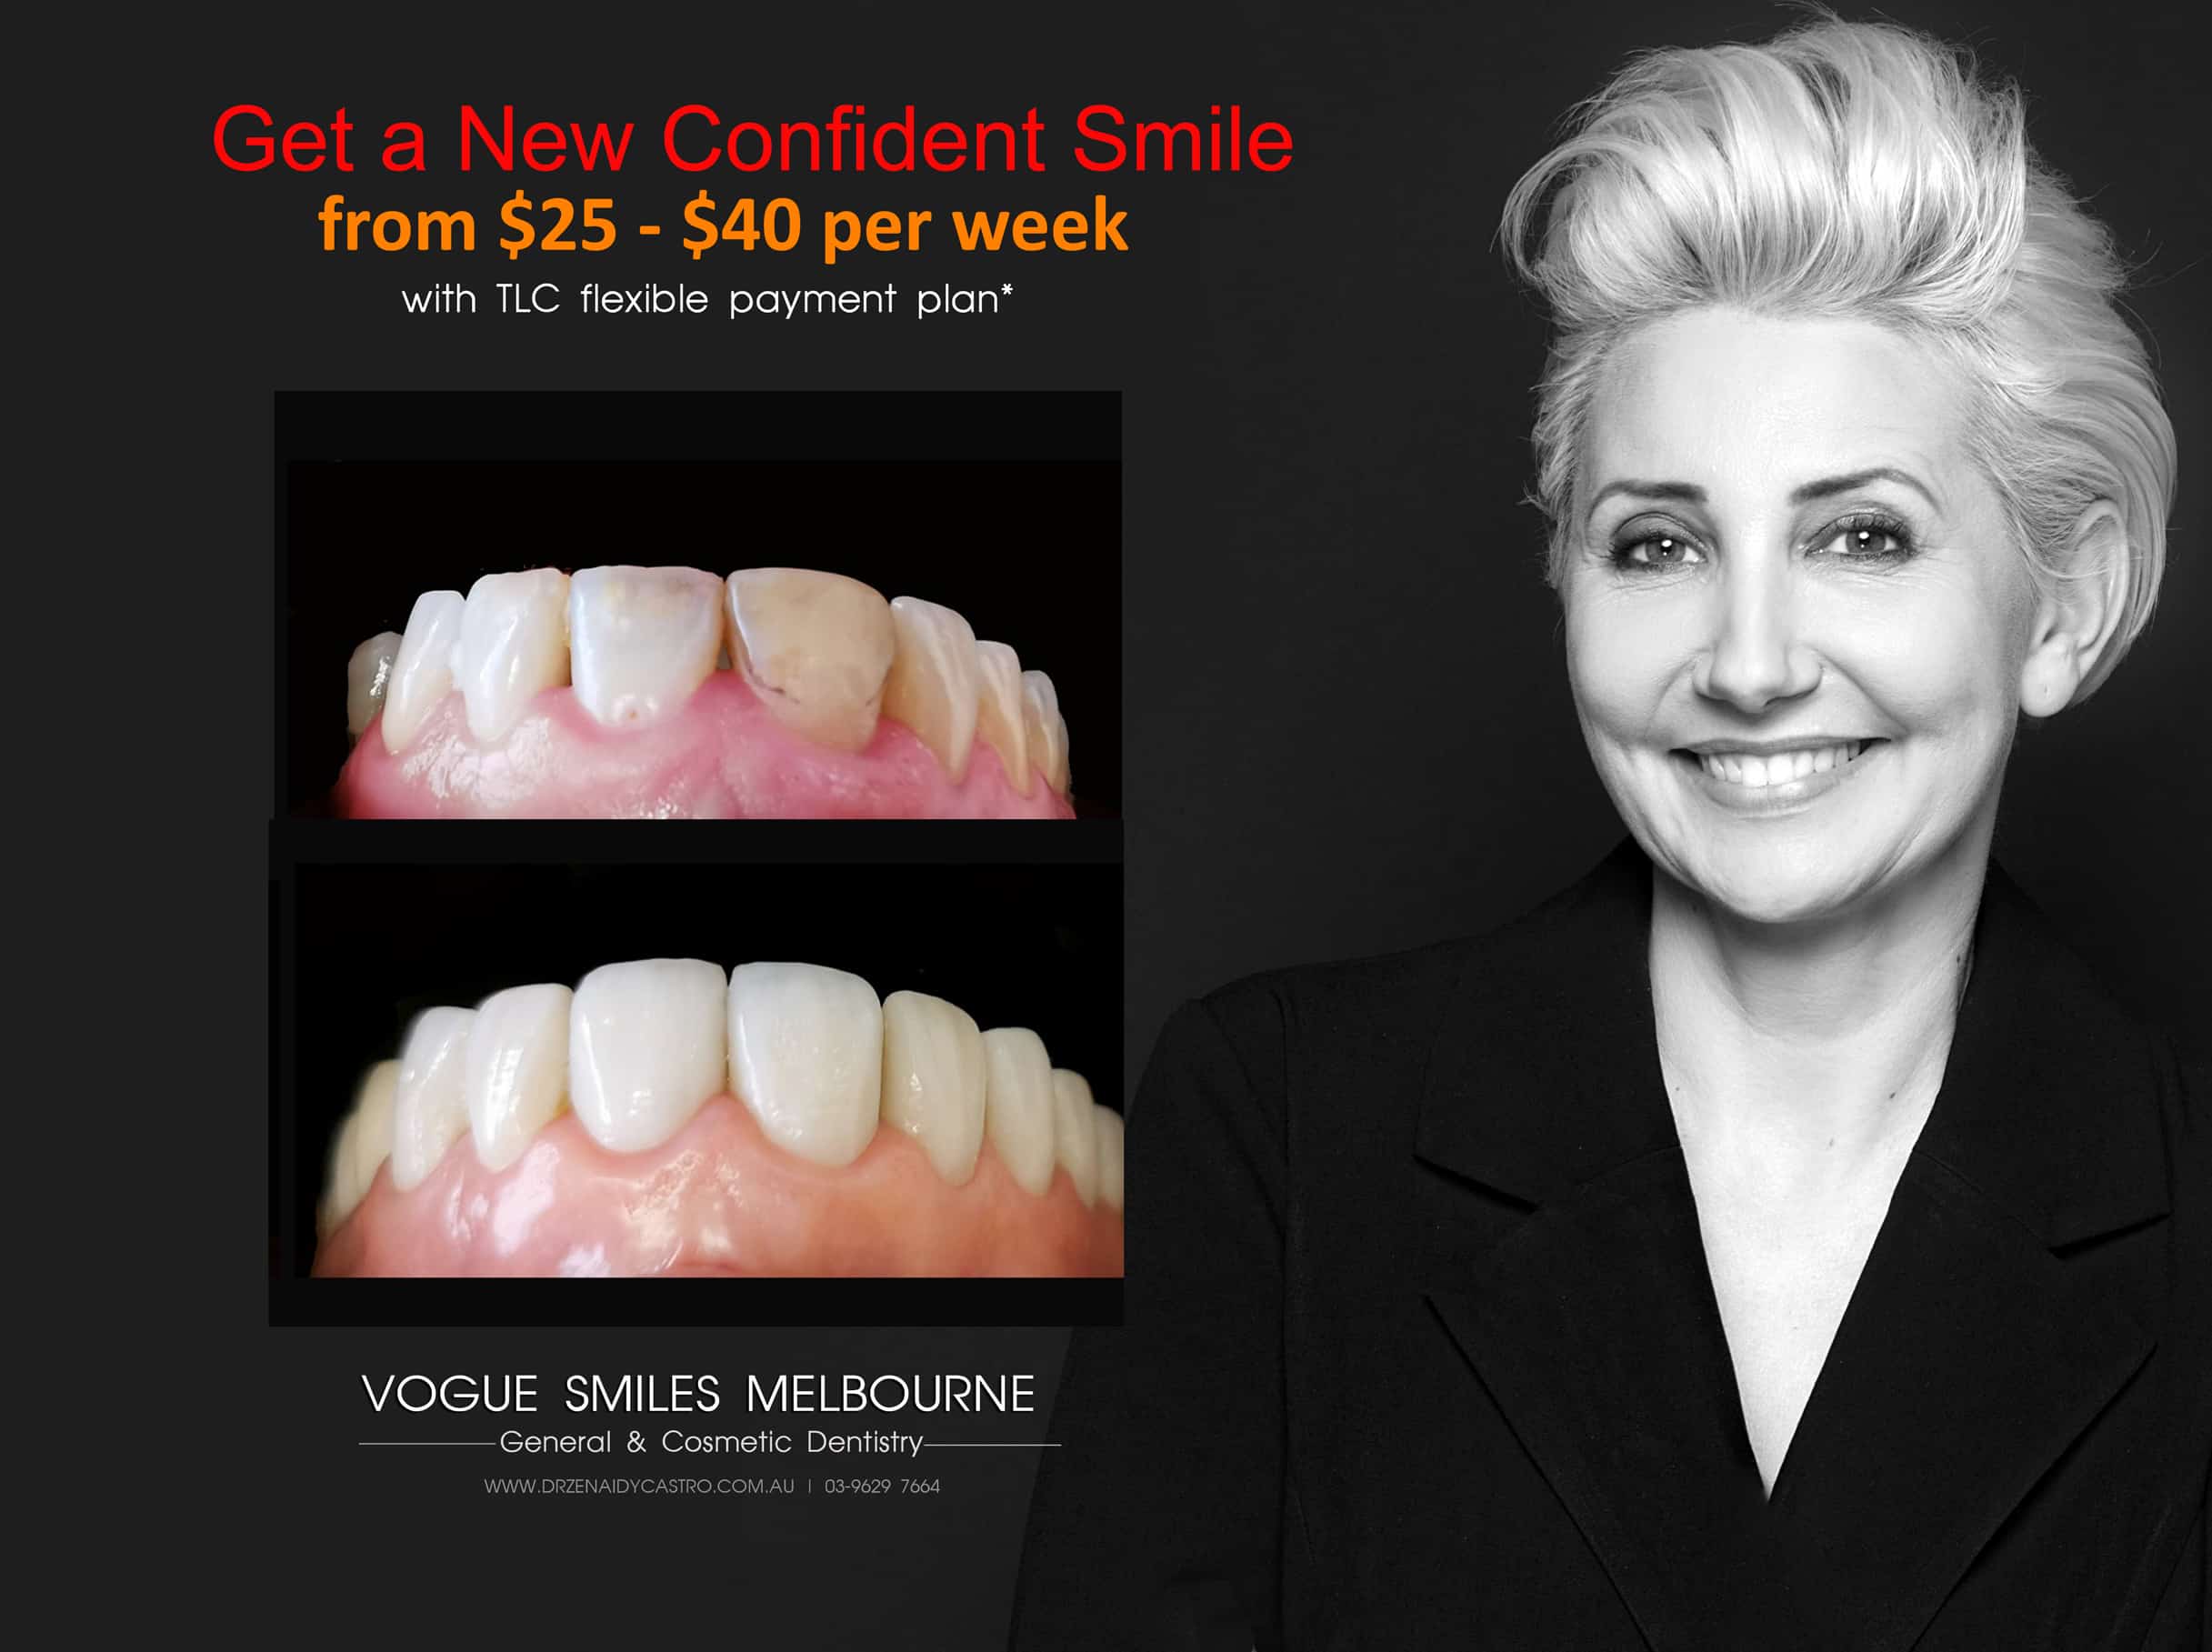 Least Expensive Smile Makeover option in Melbourne - cheapest way to improve smile 